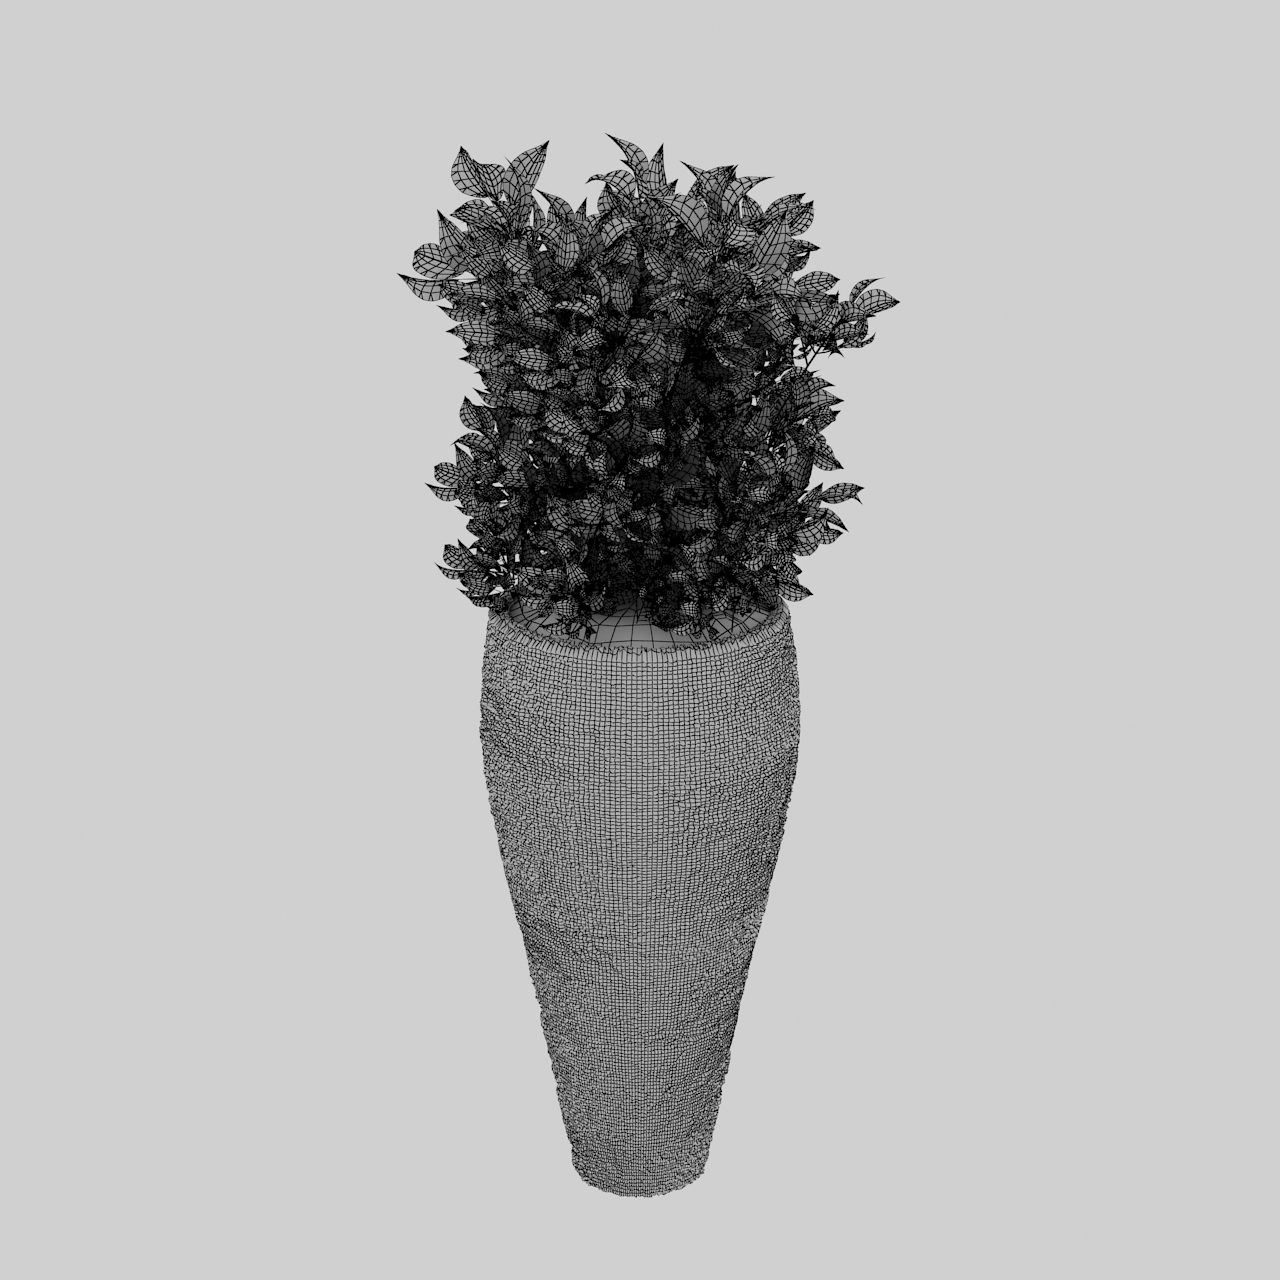 potted greenery plants 3d model